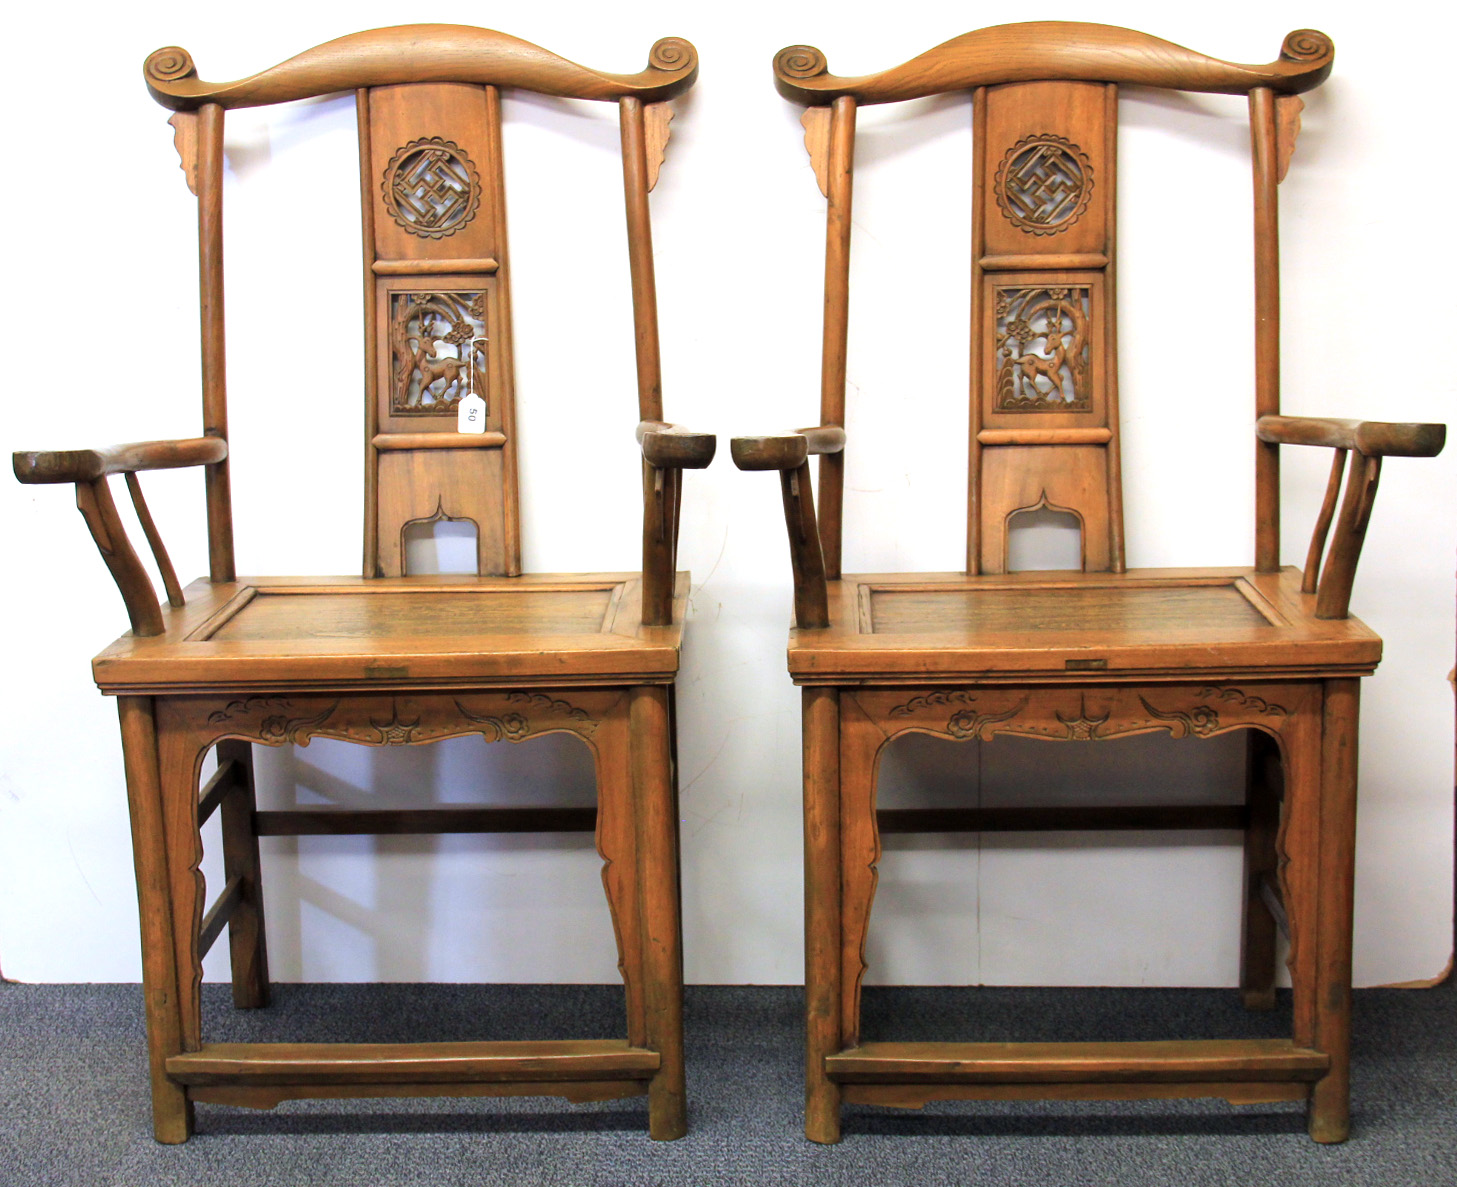 A pair of mid 20th century Chinese carved elm wood arm chairs.